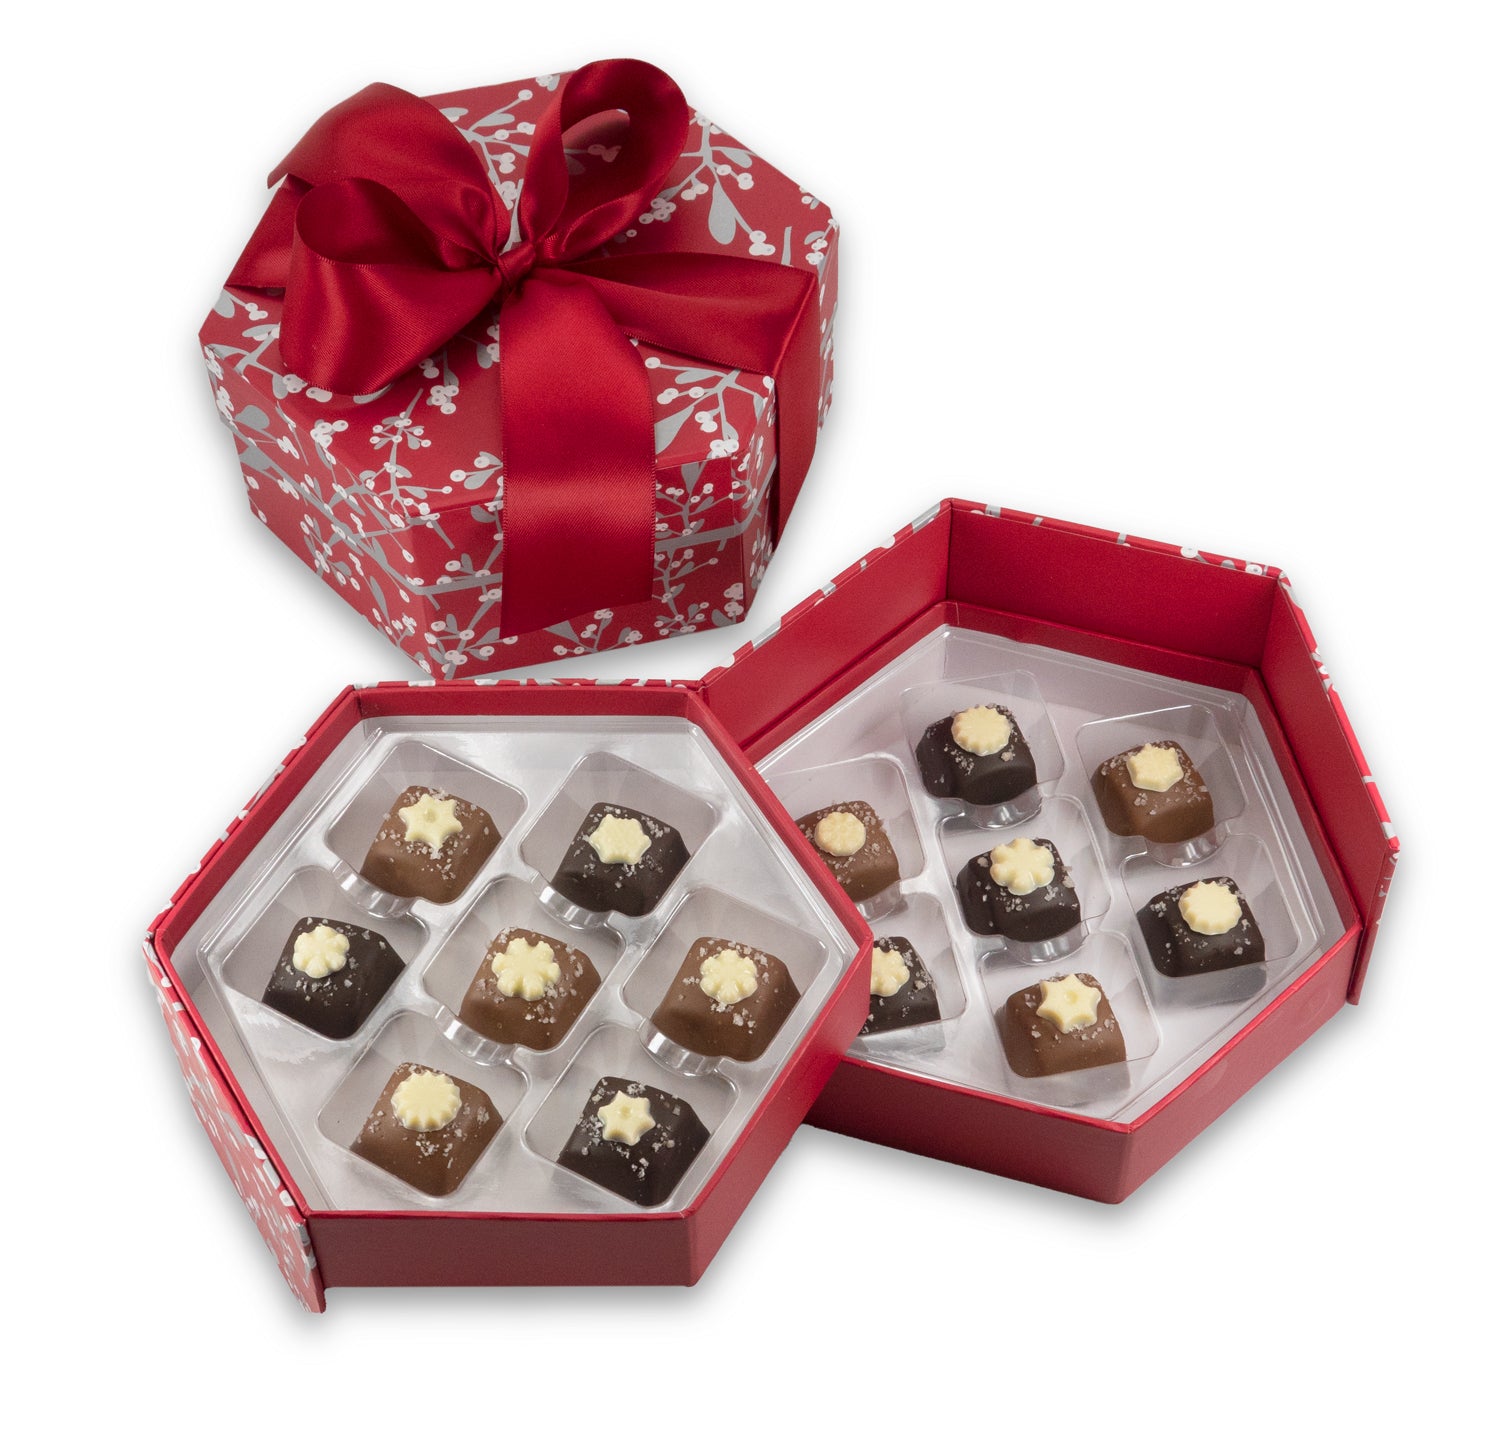 Red and white two-layer gift box with sea salt caramels